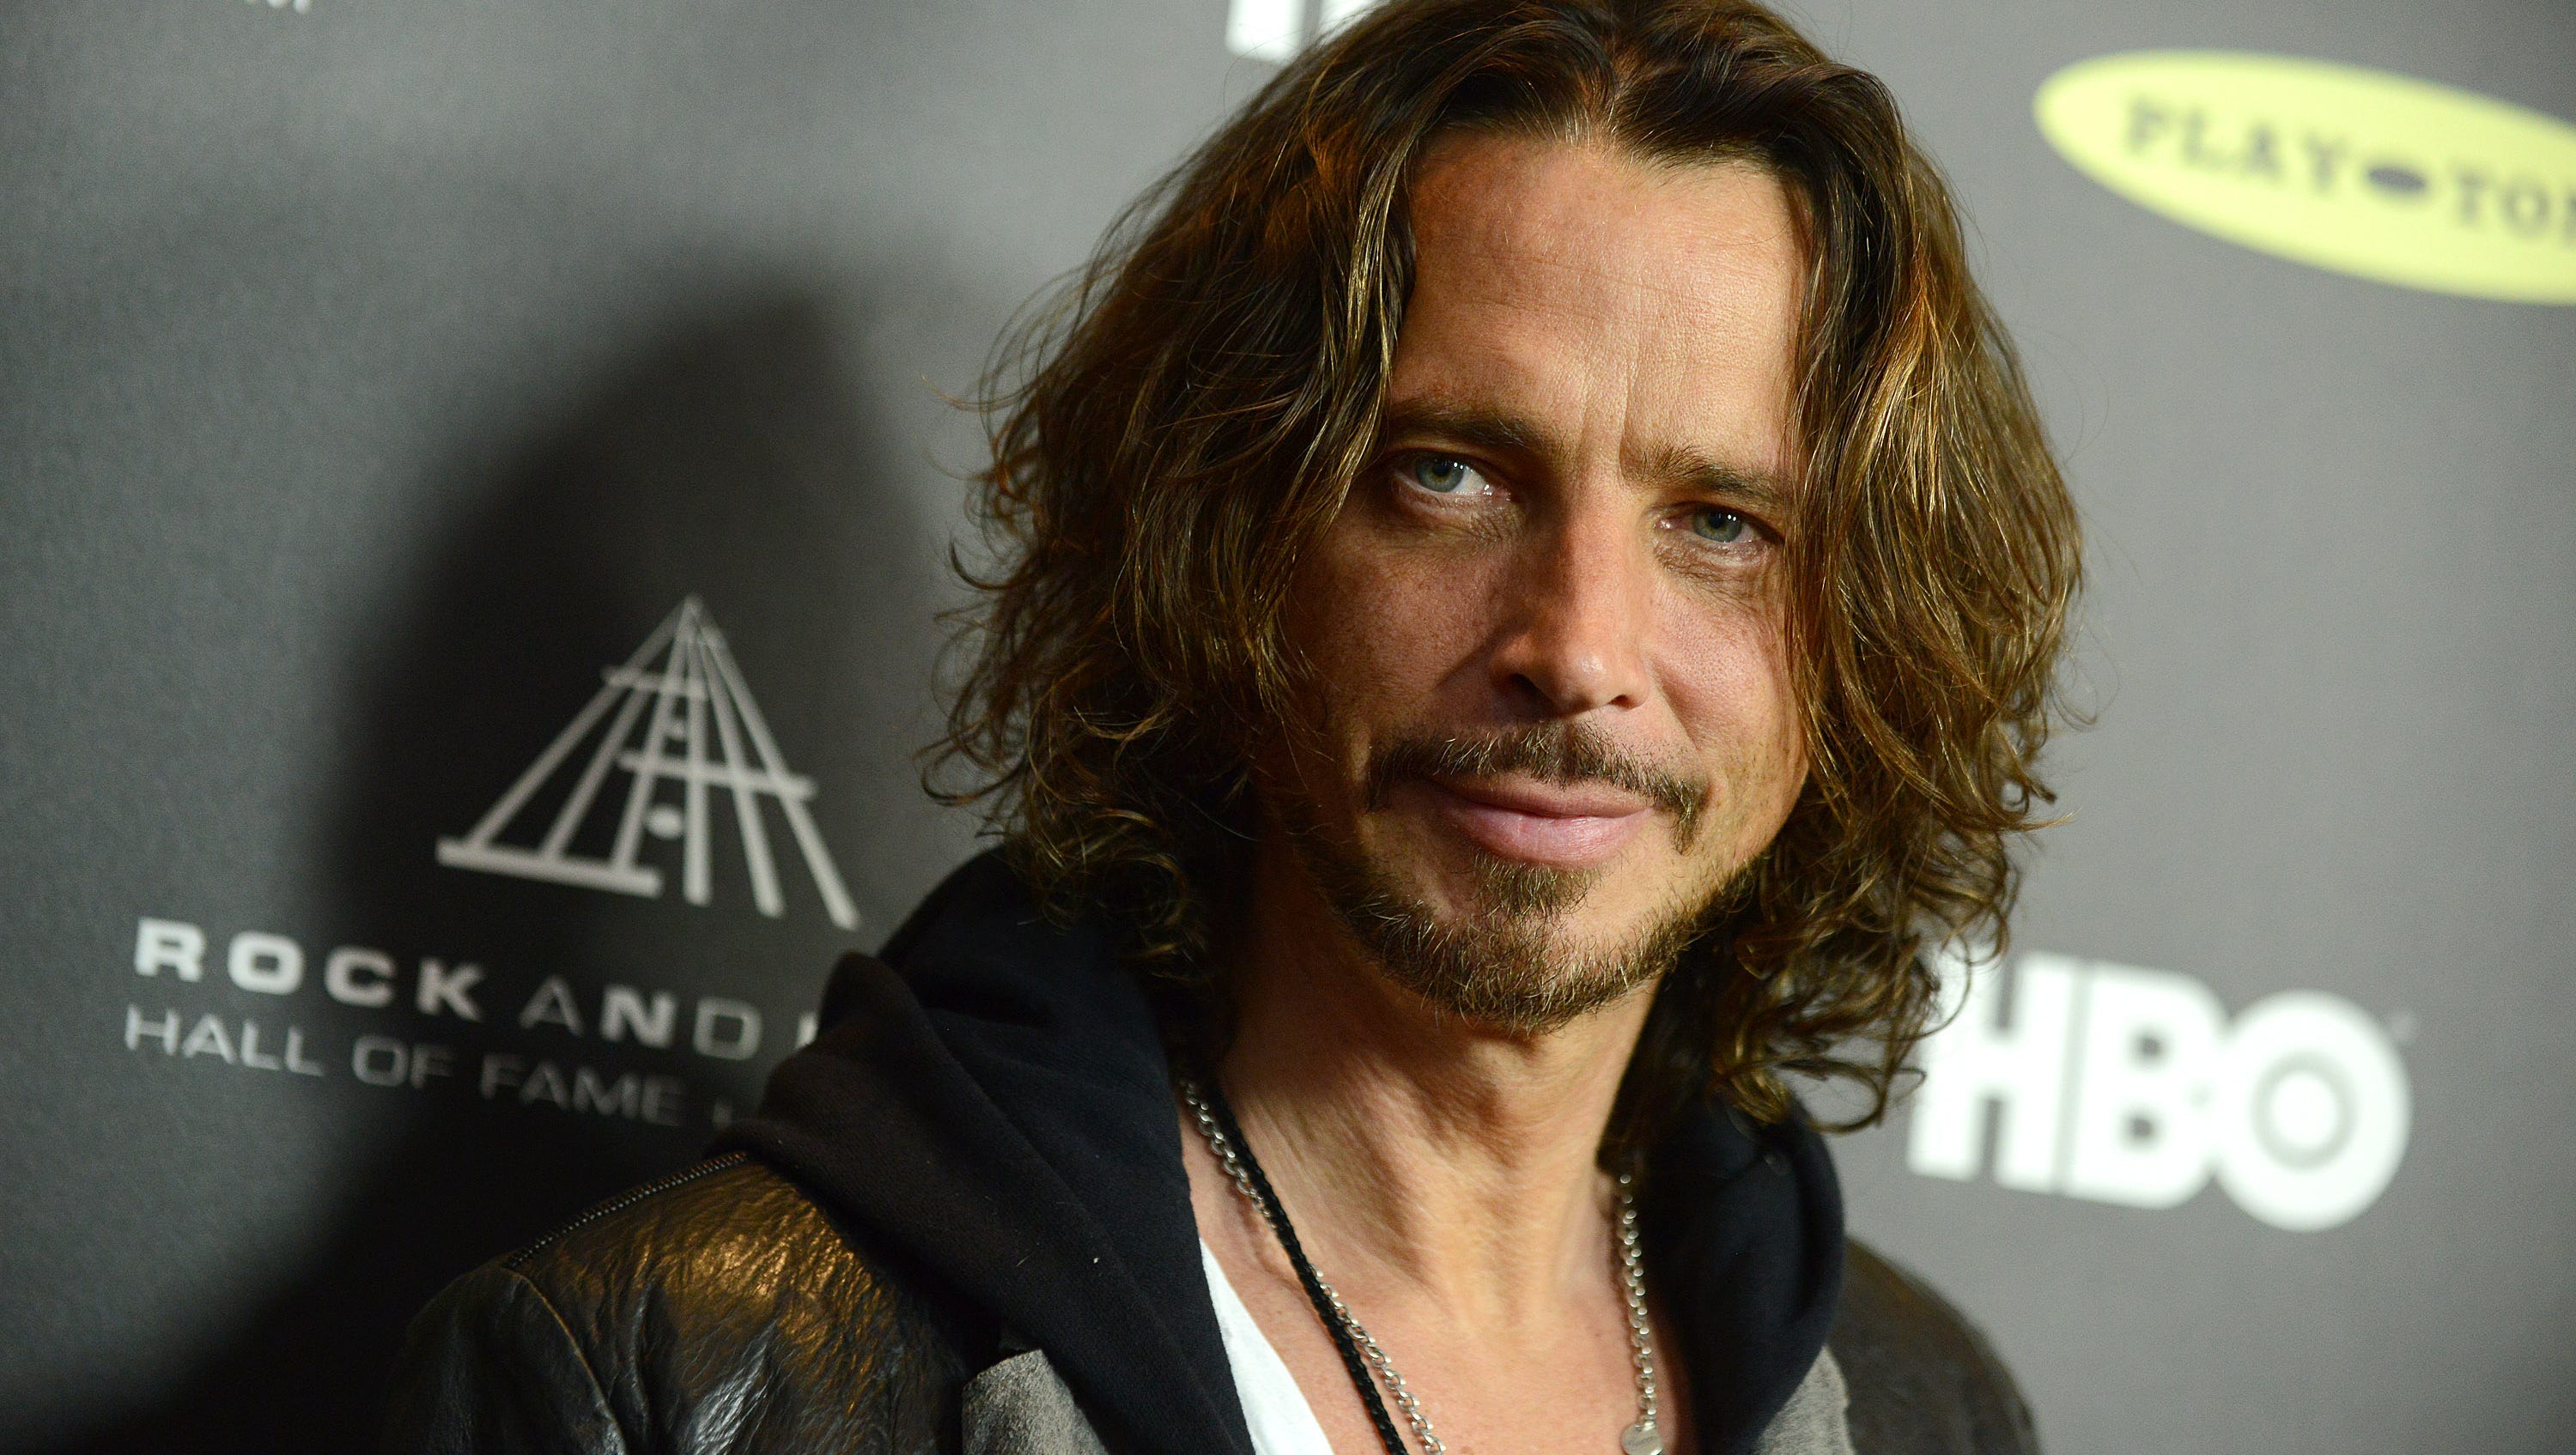 Chris Cornell attends the Rock and Roll Hall of Fame Induction Ceremony at the Nokia Theatre in Los Angeles,  April 18, 2013.